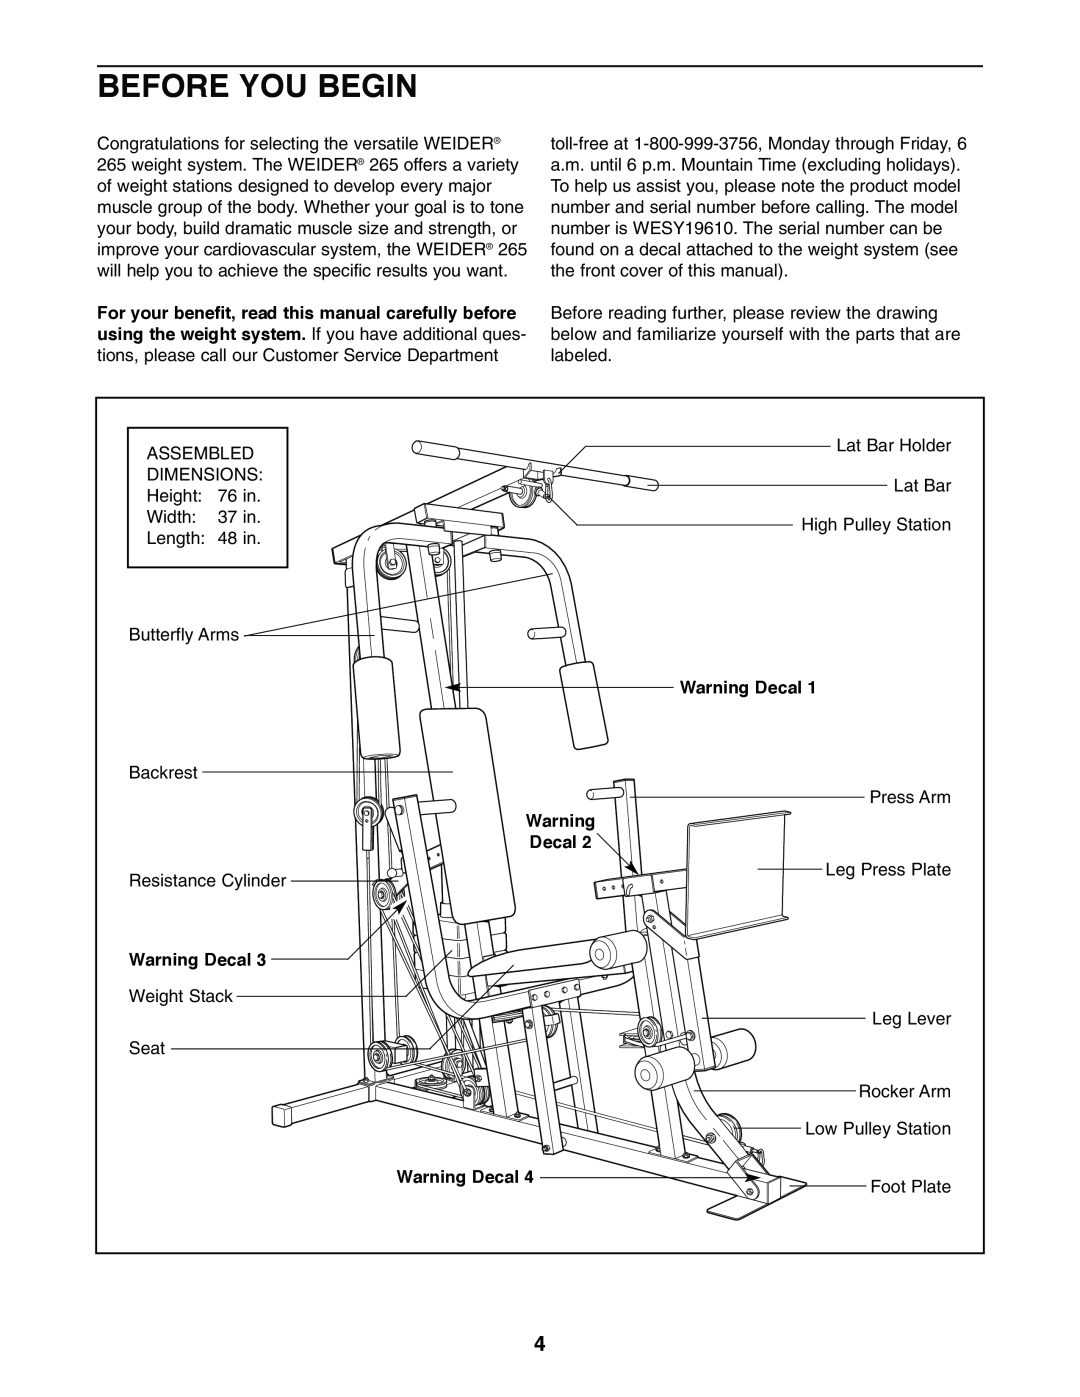 Weider WESY19610 user manual Before You Begin 